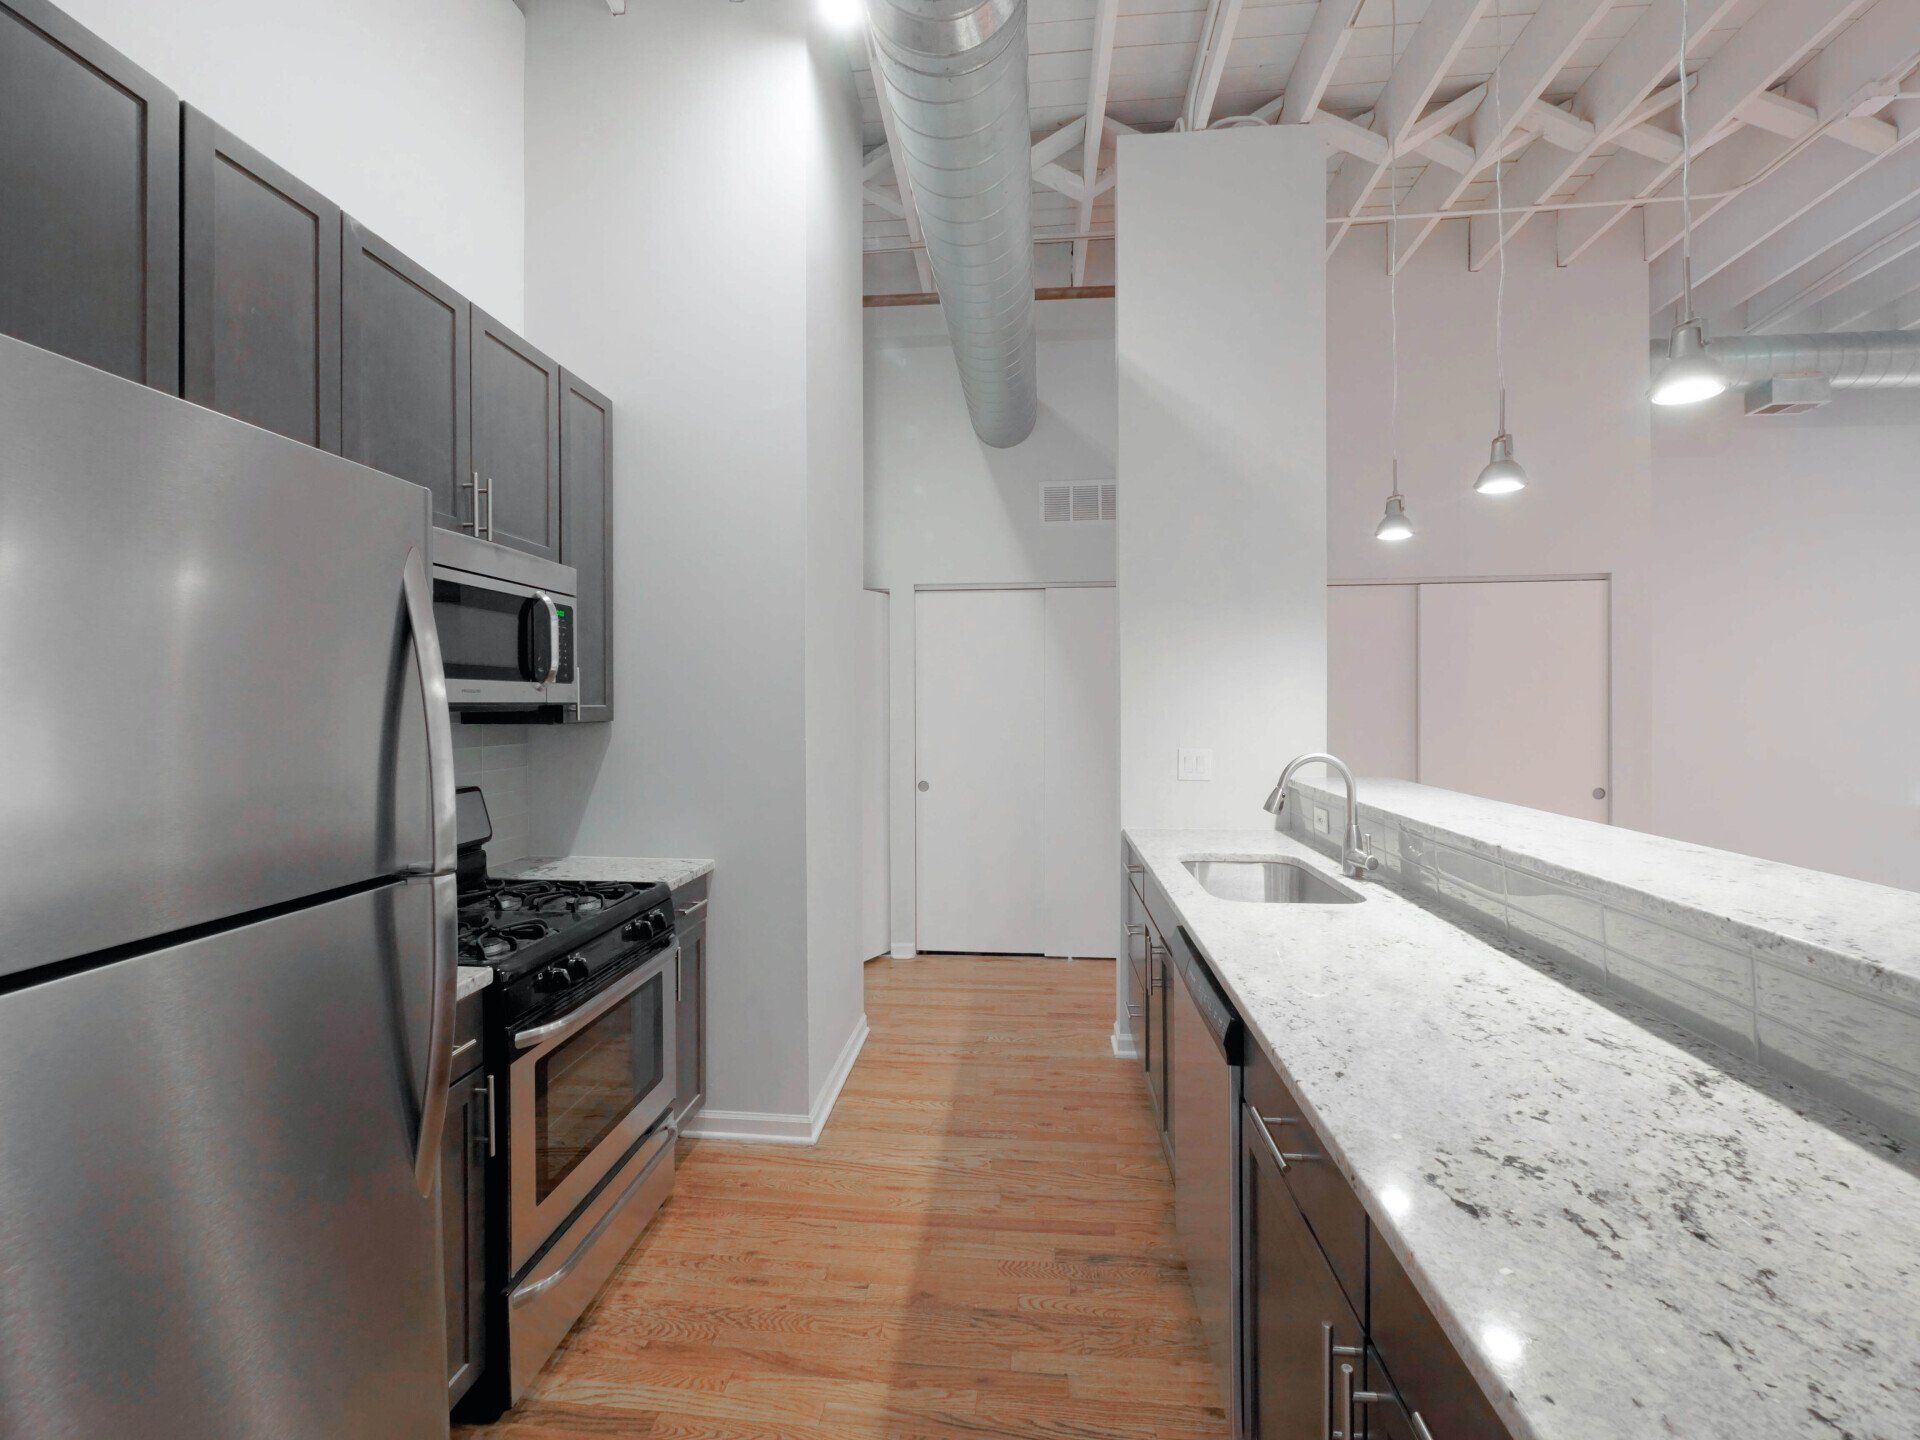 A kitchen with stainless steel appliances and granite counter tops at 1550 North Damen.